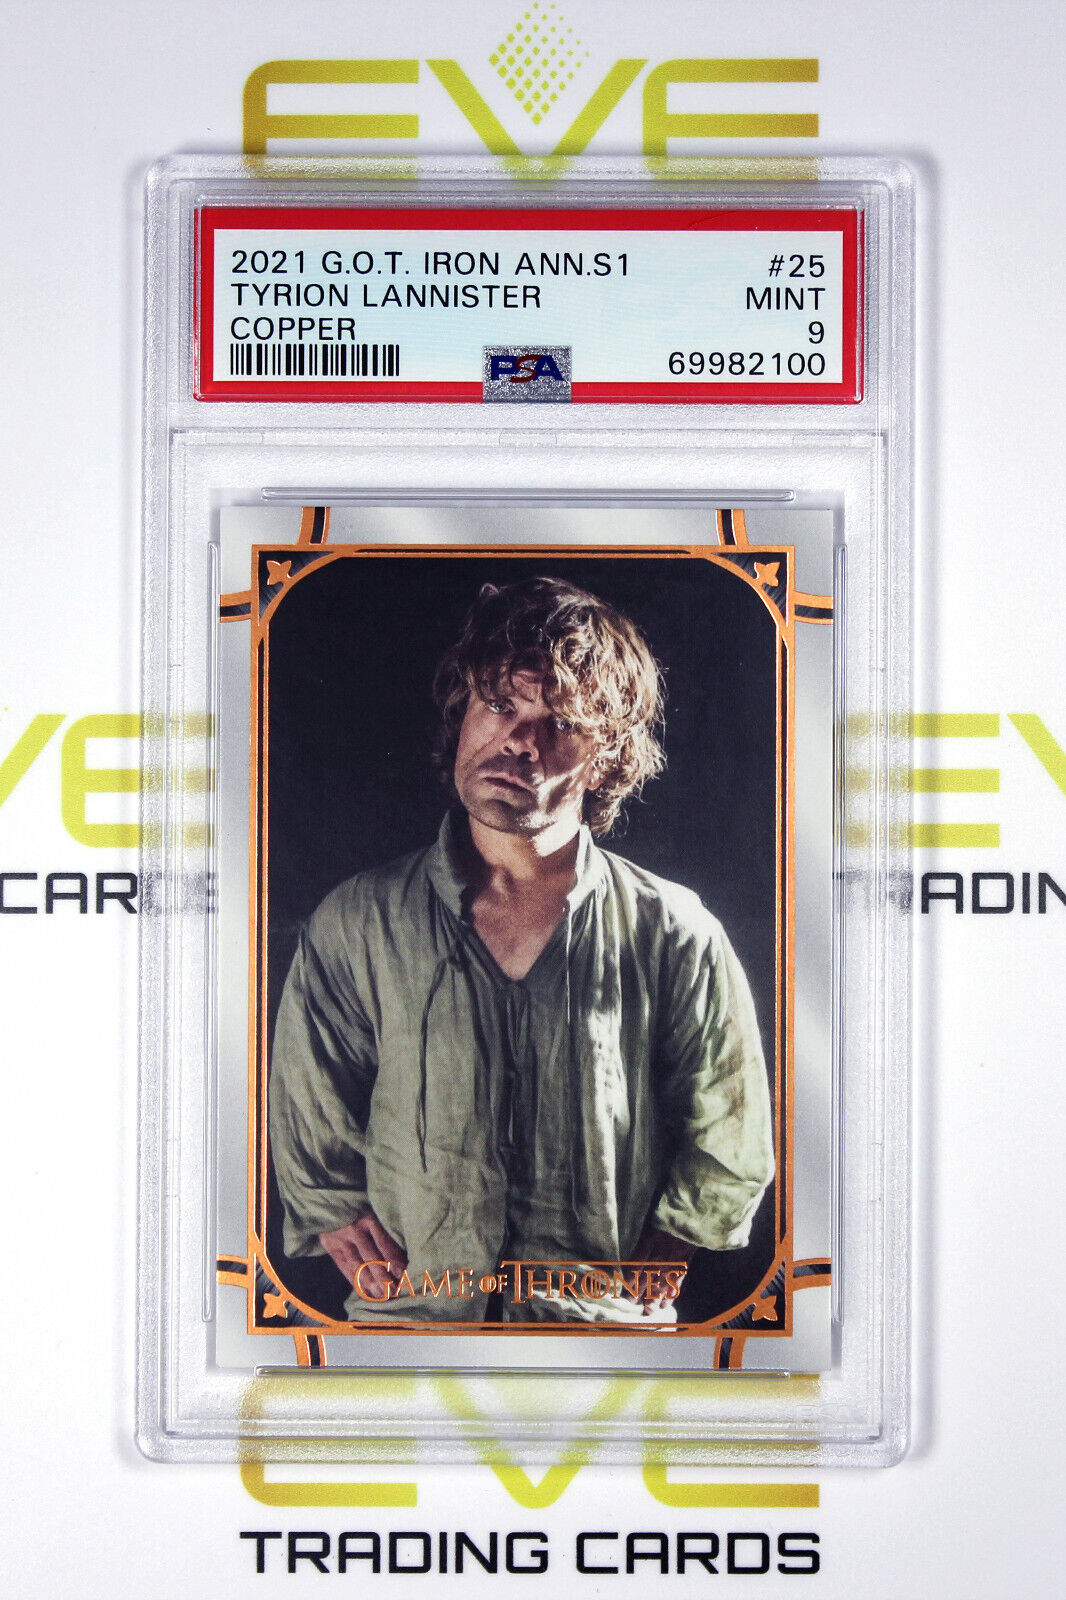 Graded Game of Thrones Card - #25 2021 Tyrion Lannister - Copper /199 - PSA 9